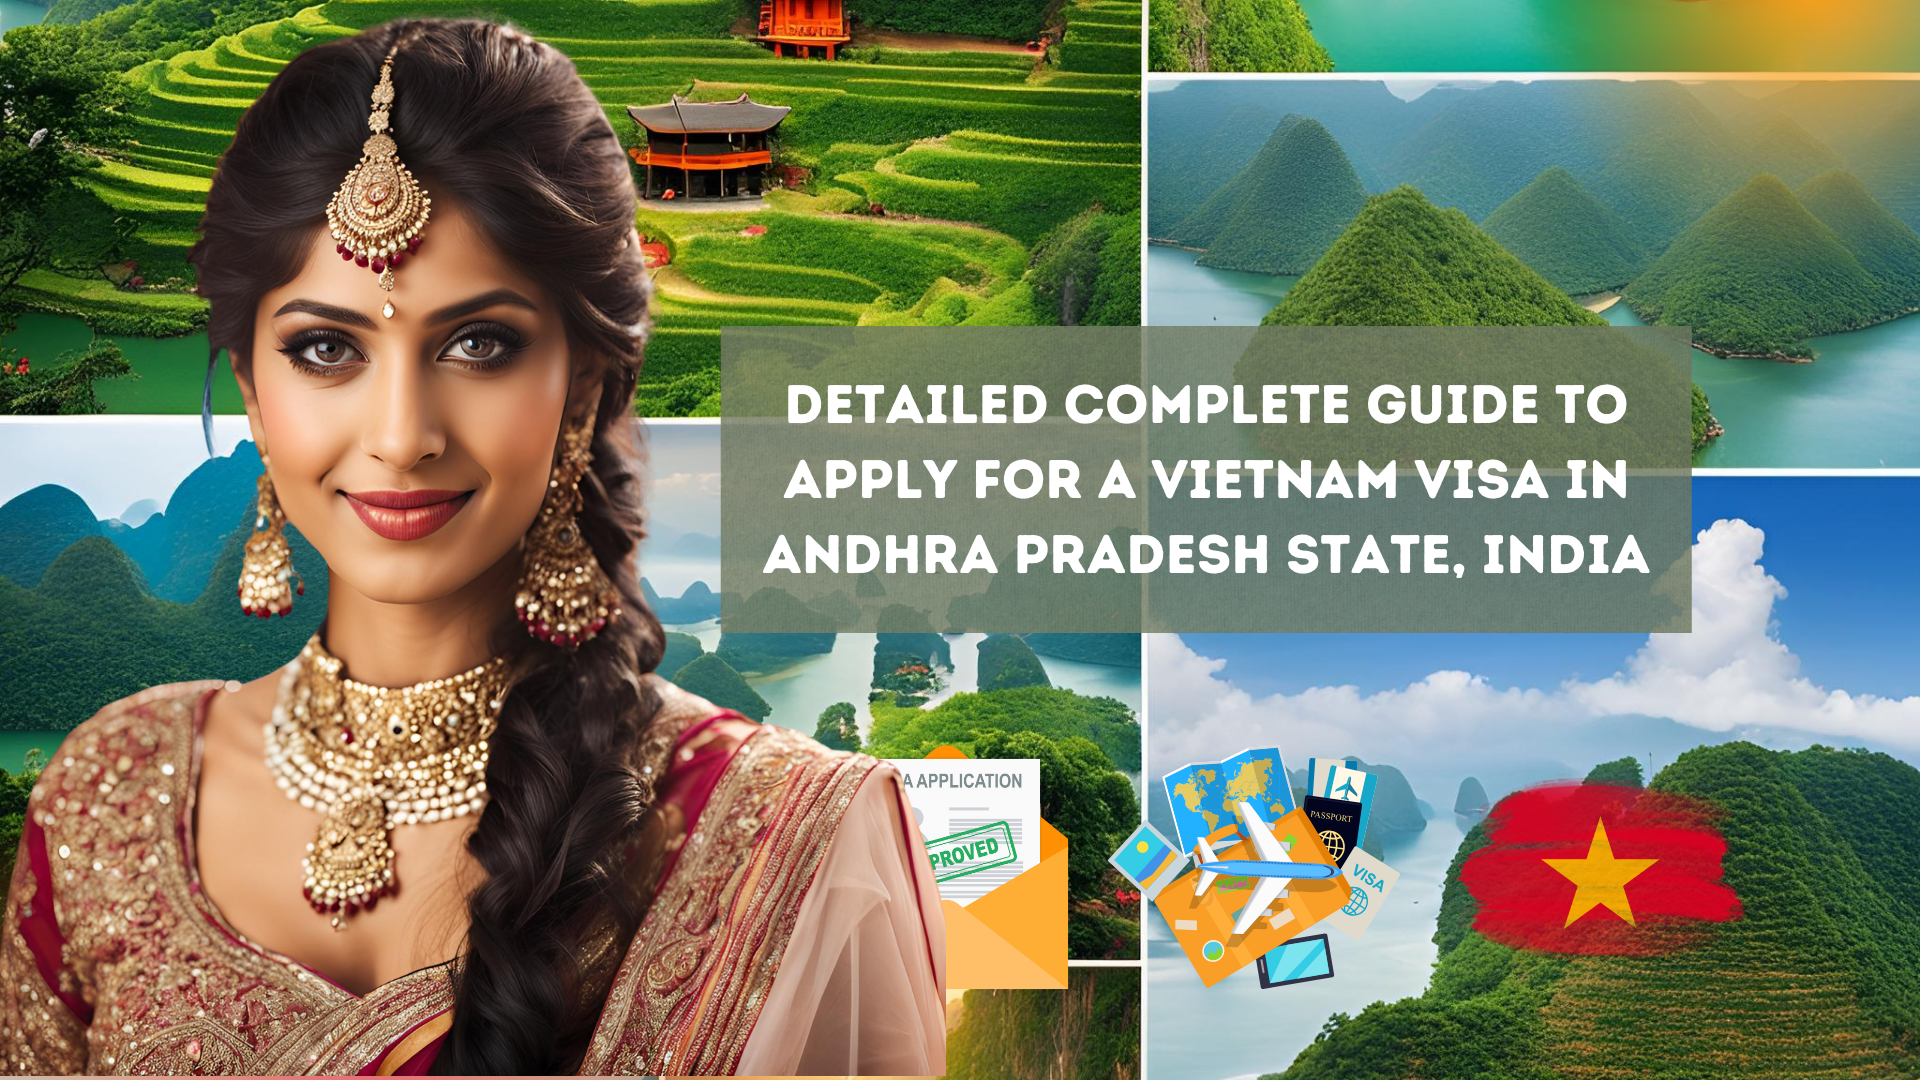 Detailed Complete Guide to Apply for a Vietnam Visa in Andhra Pradesh State, India